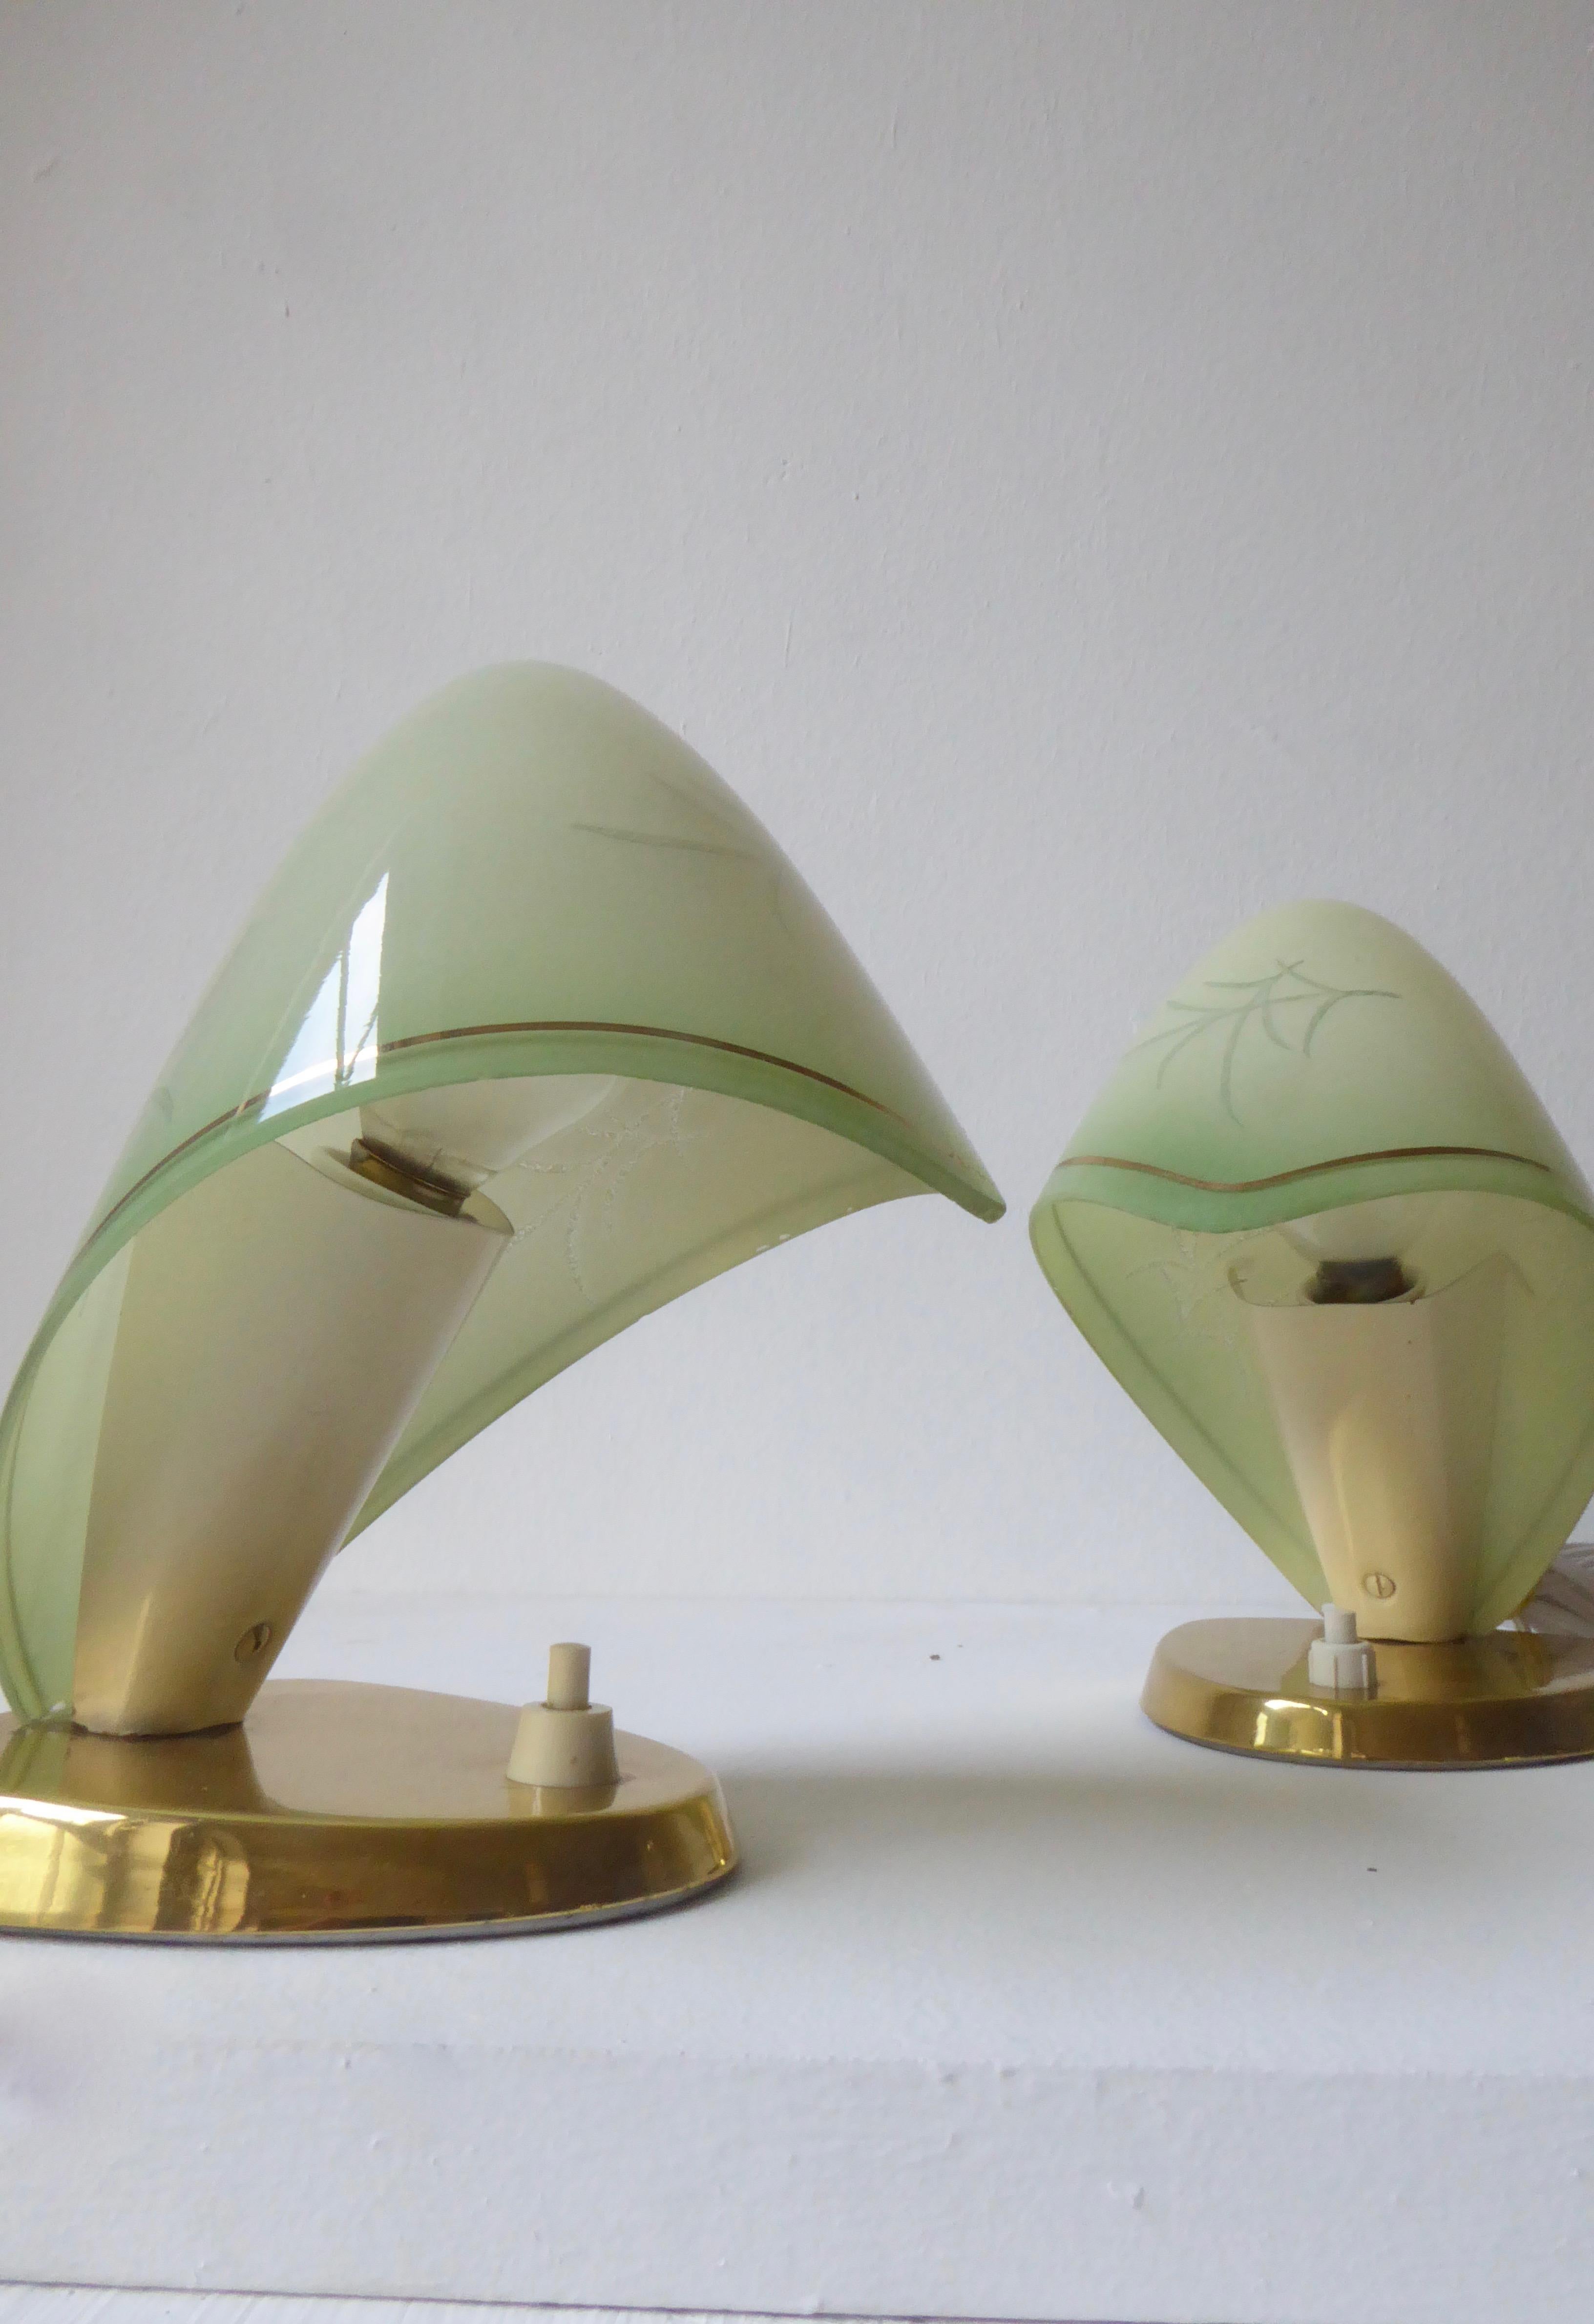 A pair table lamps (2) from the 1950s, modell called Nonnenhaube (coif). Made by Rupert Nikoll Austria. New electrified. With Nikoll sticker on the back. Brass, metall and shades in glass.